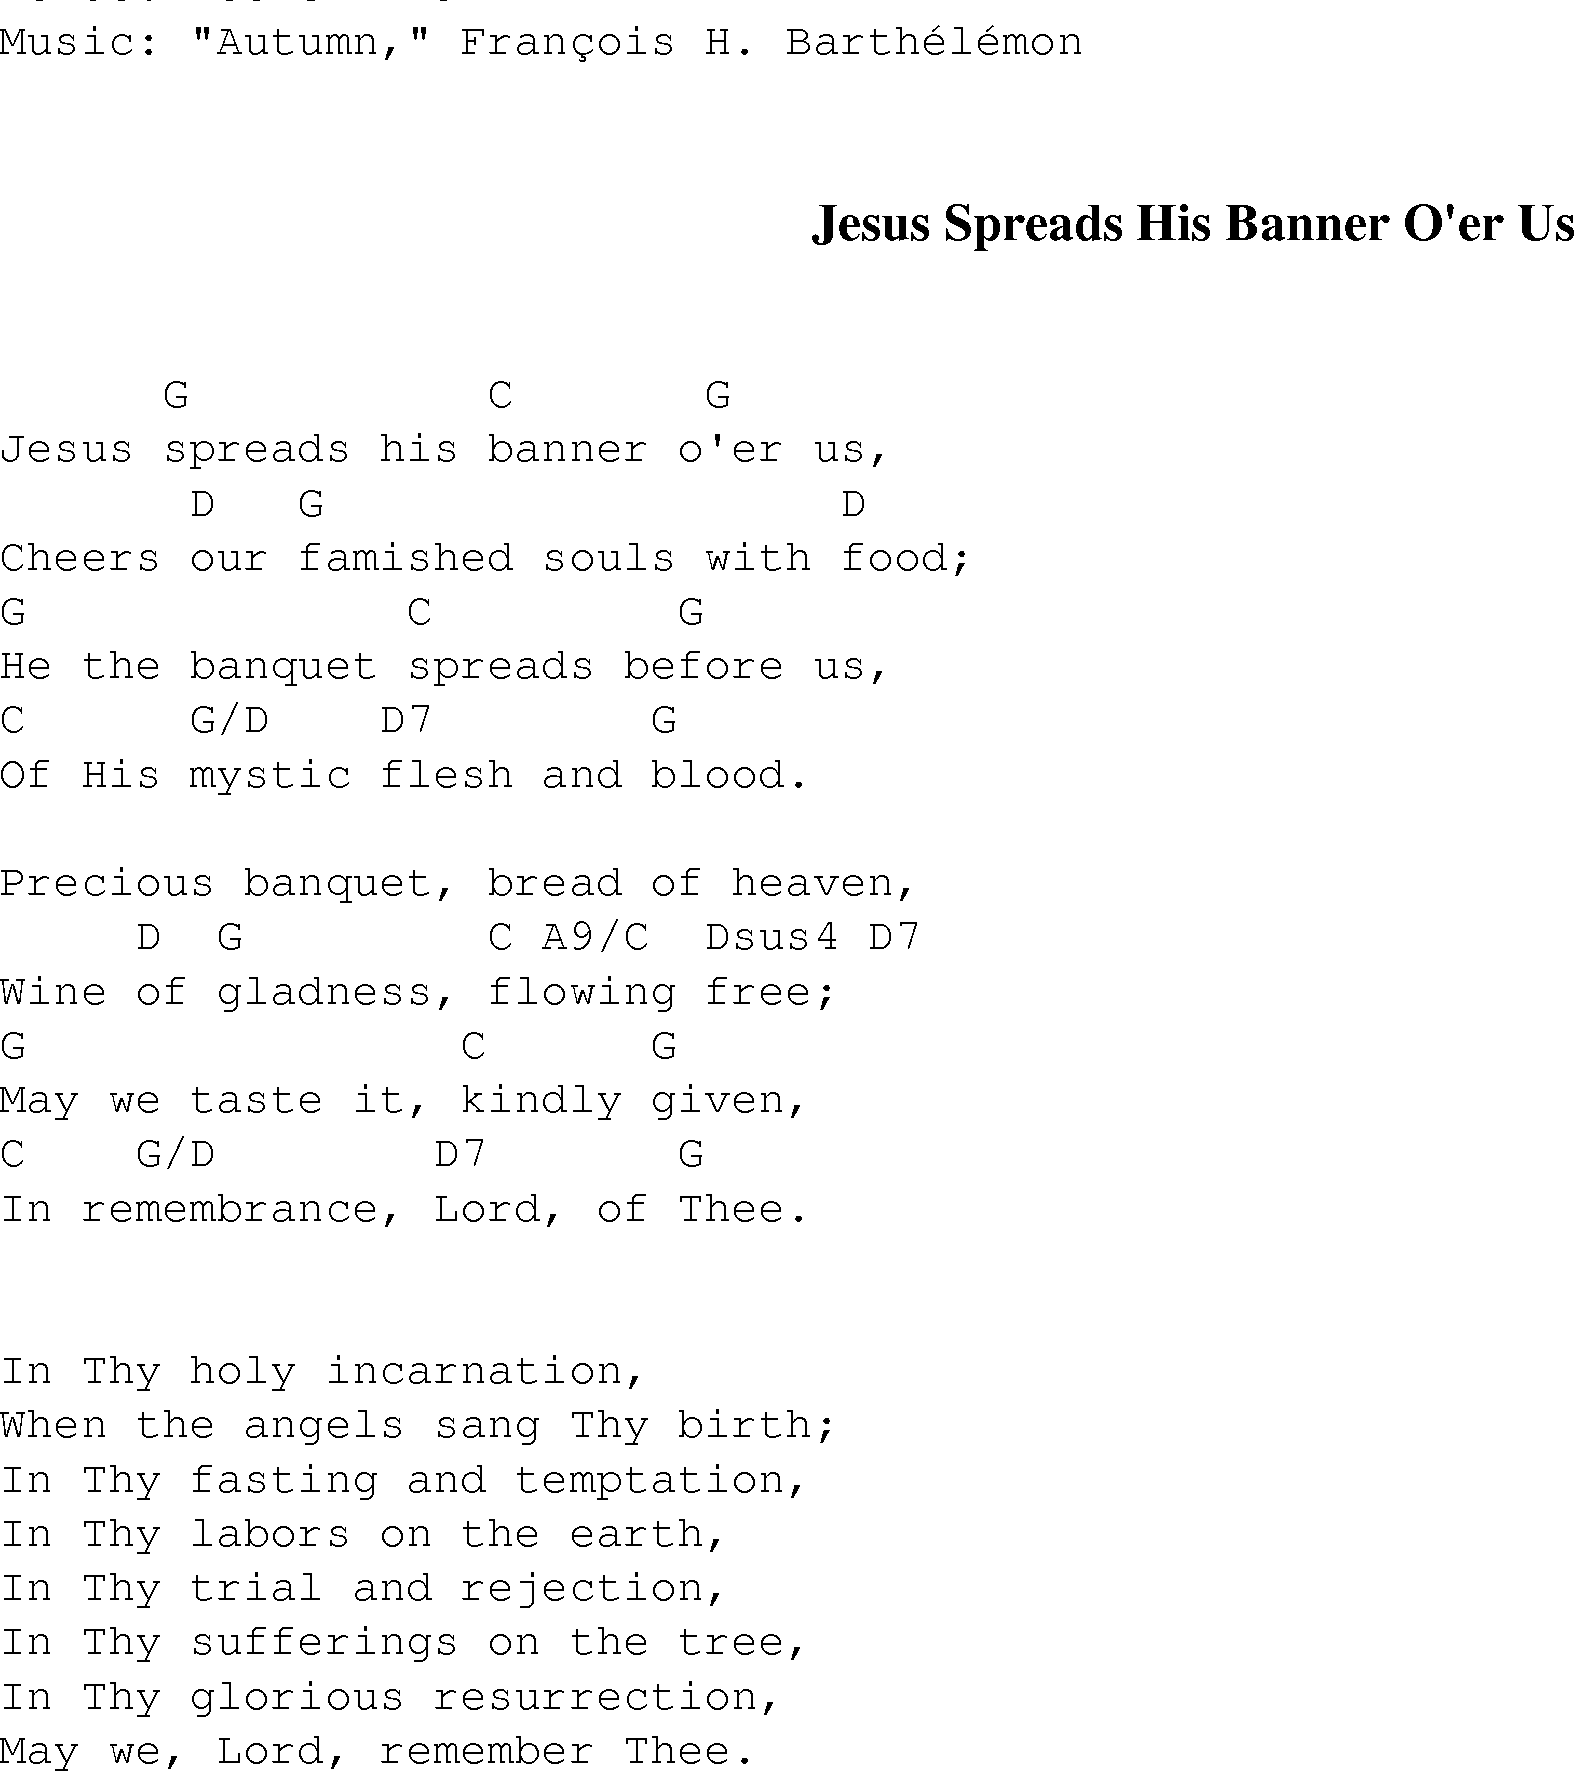 Gospel Song: jesus_spreads_his_banner_oer_us, lyrics and chords.